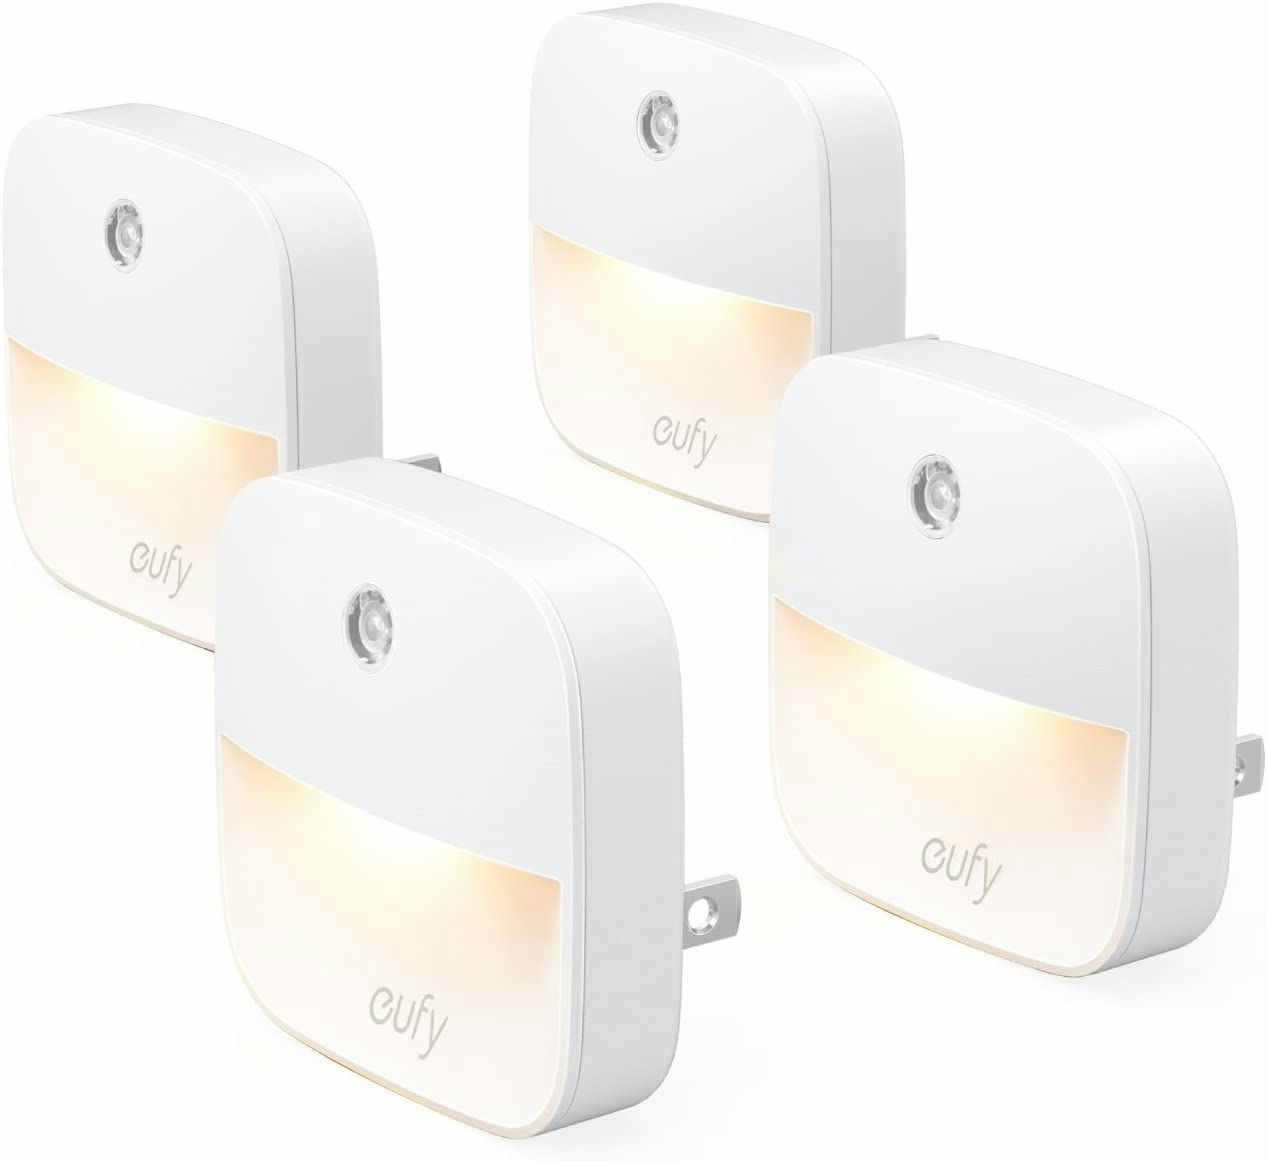 A four pack of Eufy plug-in night lights.